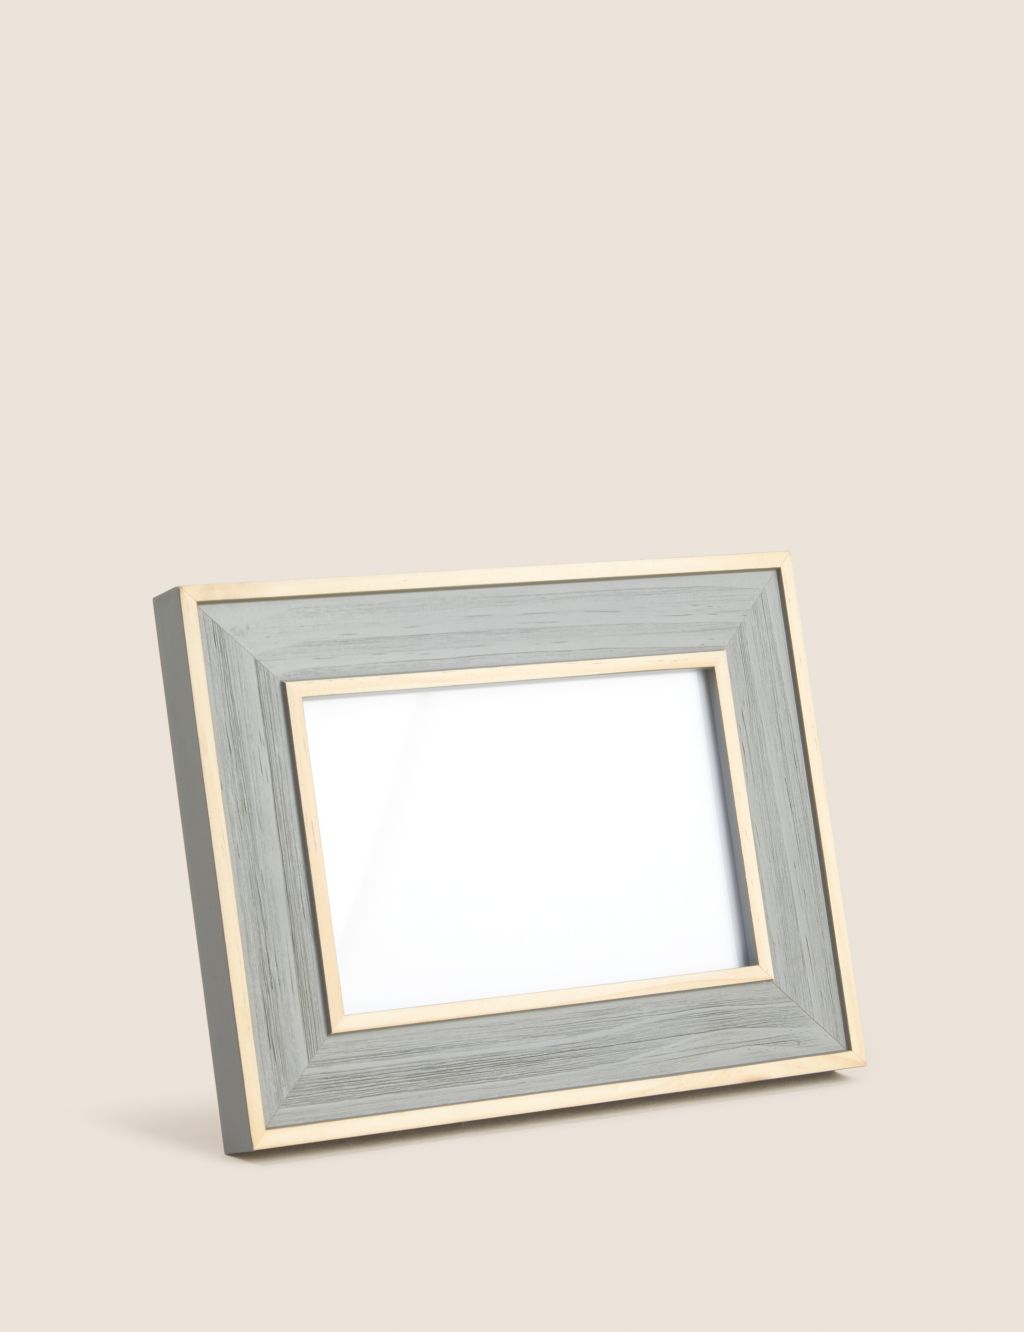 Two Tone Wood Photo Frame 4x6 inch image 4